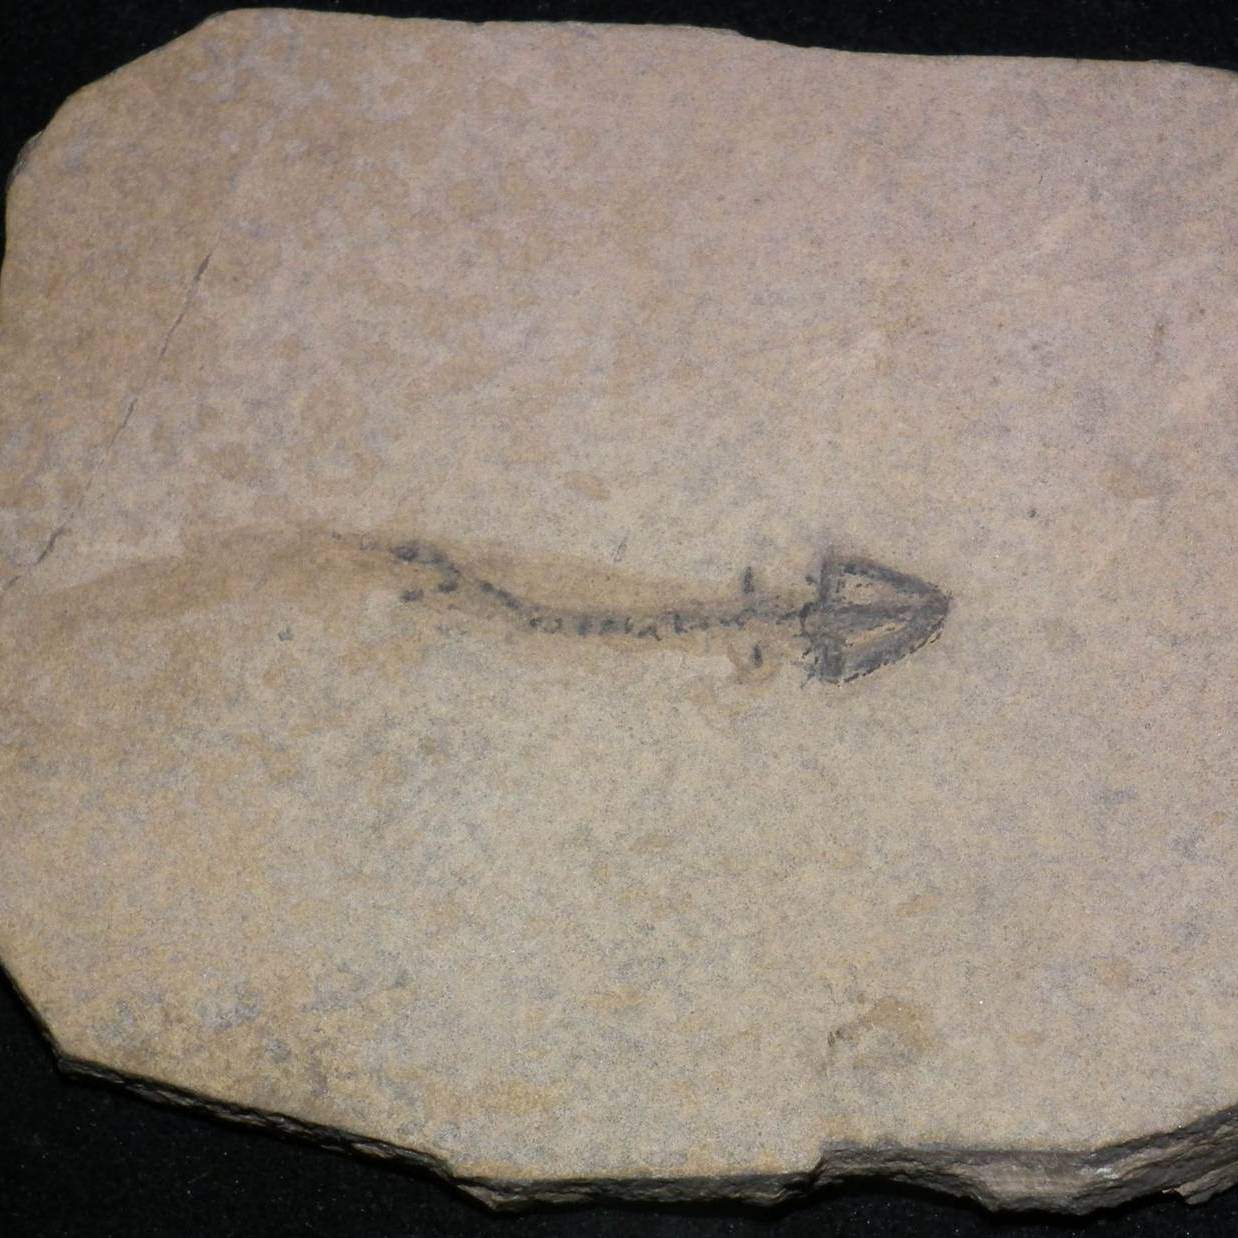 Branchiosaurus Fossils for sale in the UK